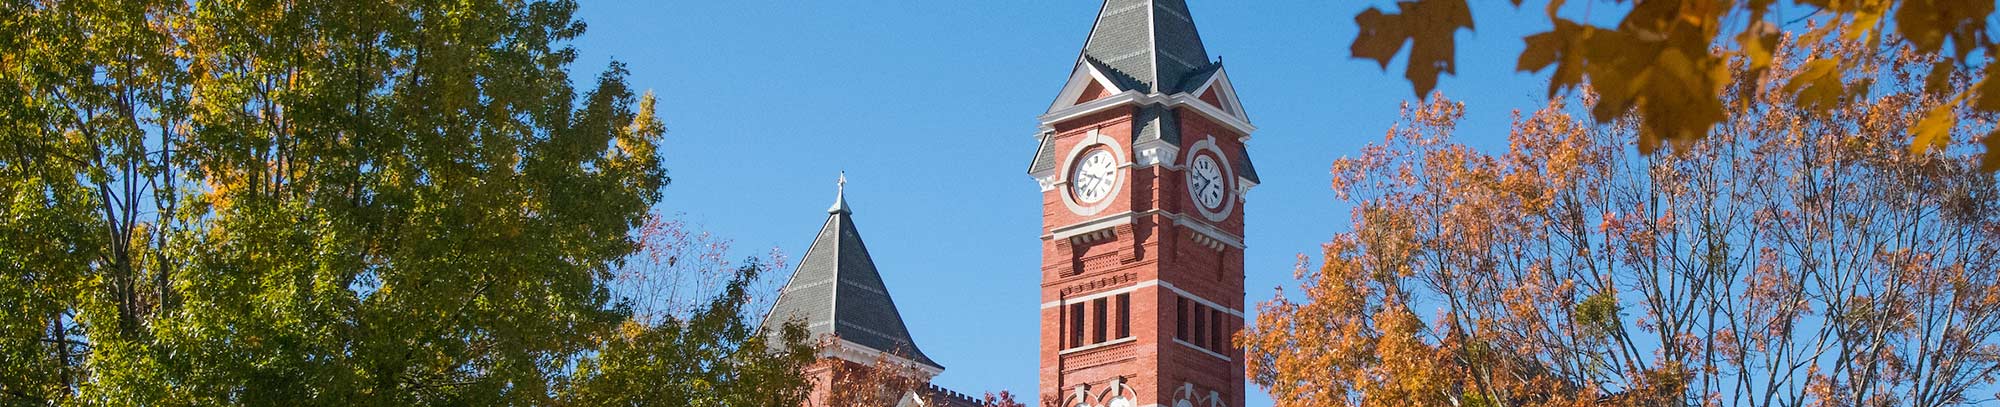 the Samford Hall clocktower is pictured